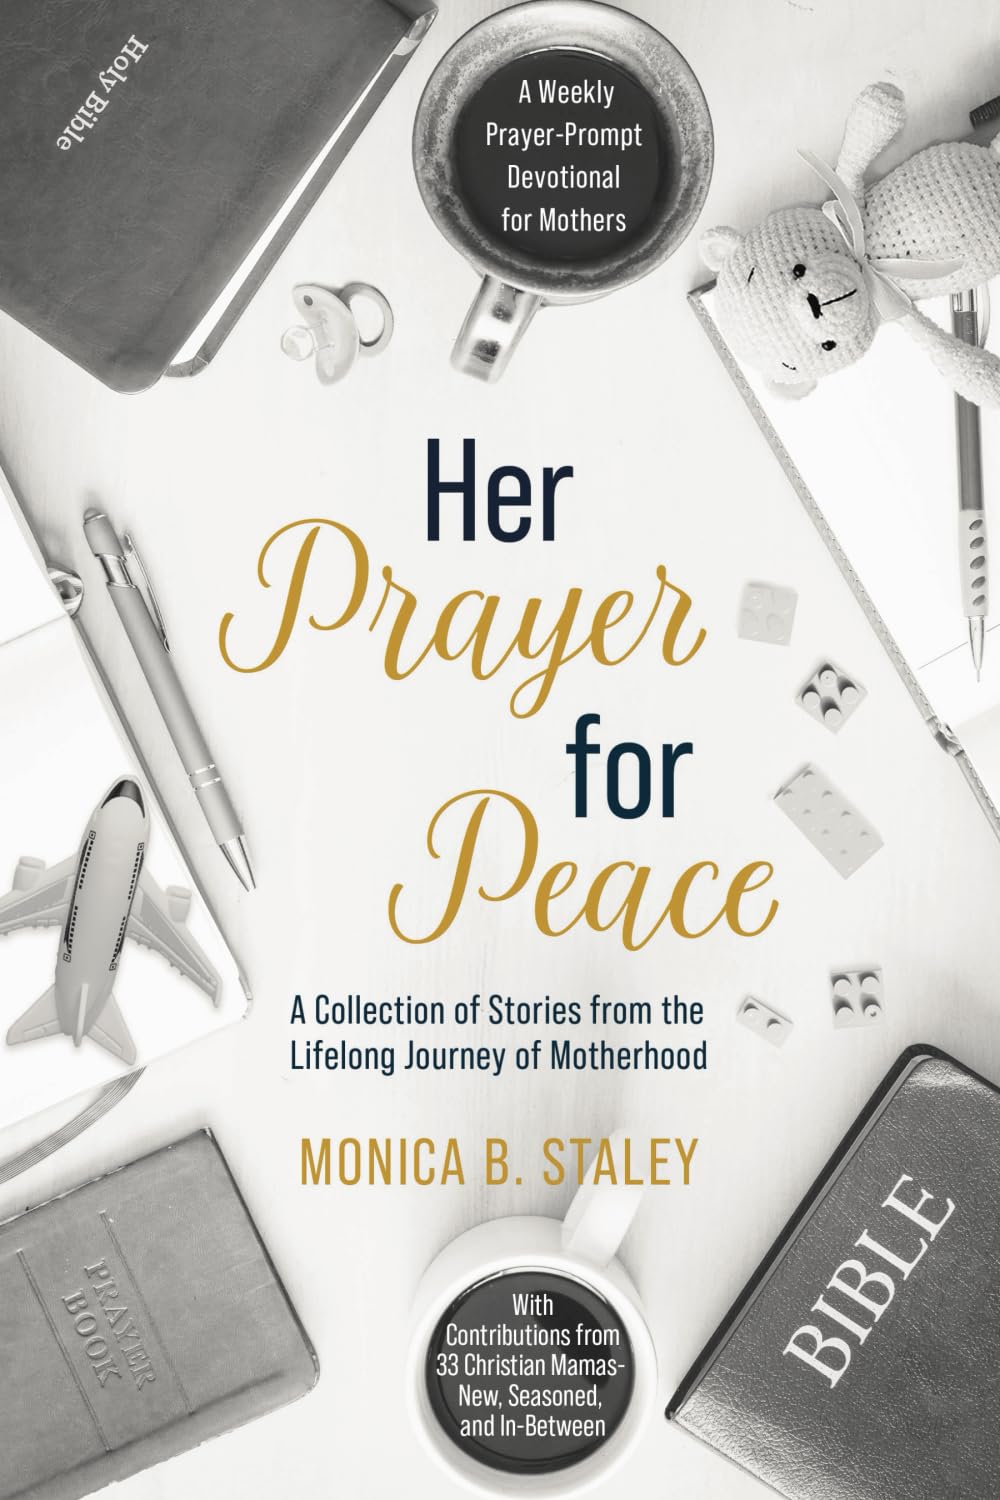 Her Prayer for Peace by Monica Staley